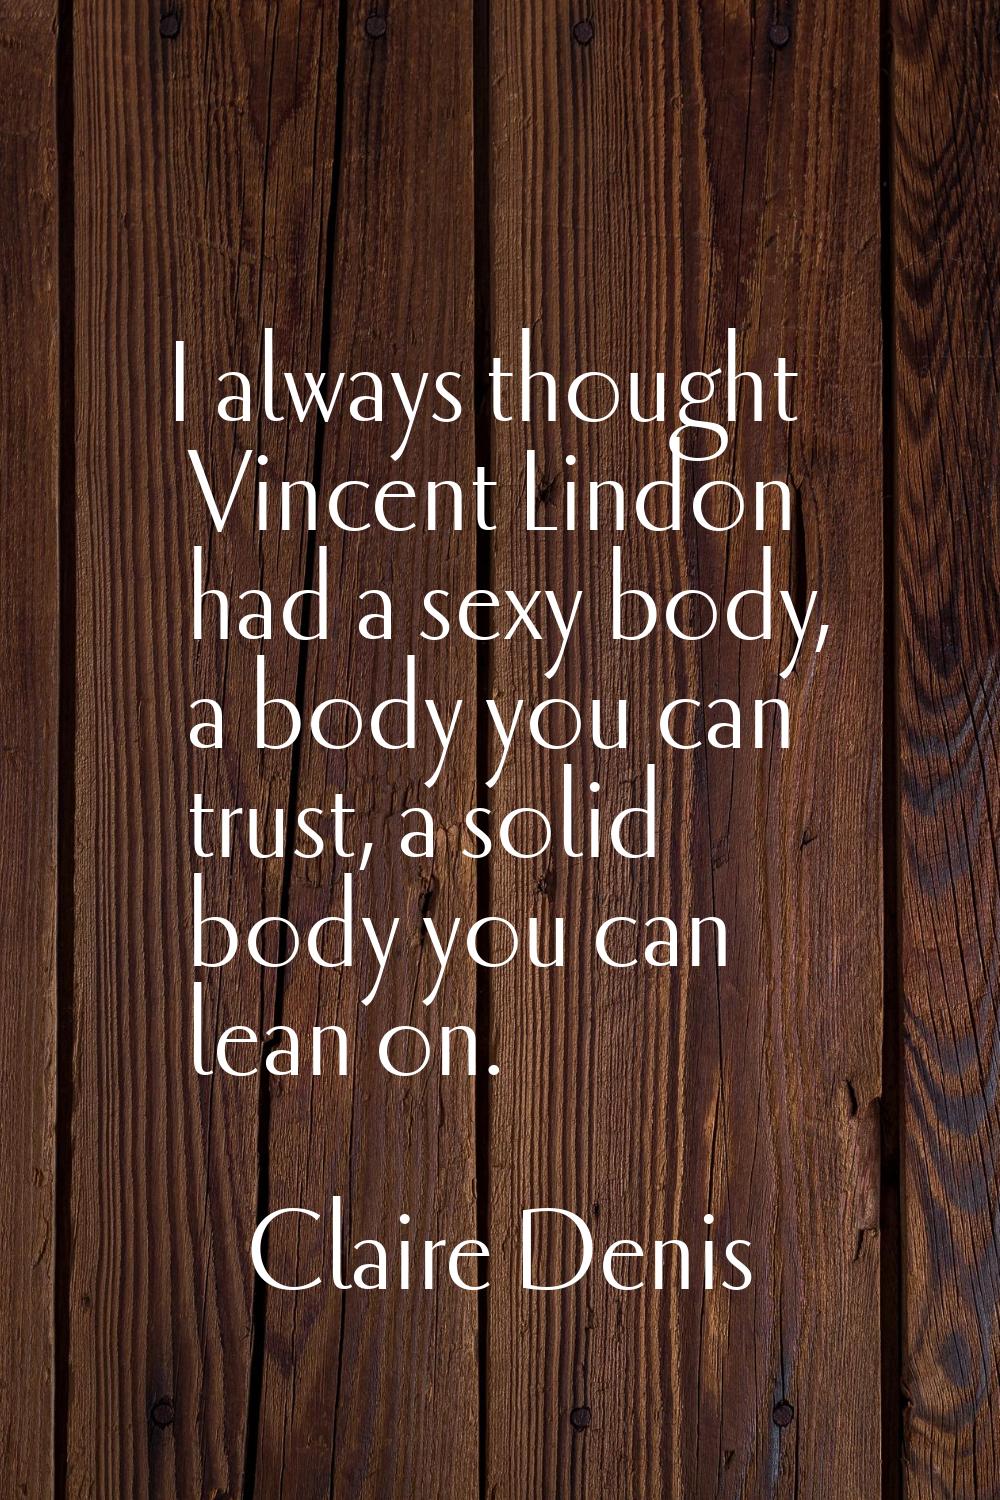 I always thought Vincent Lindon had a sexy body, a body you can trust, a solid body you can lean on